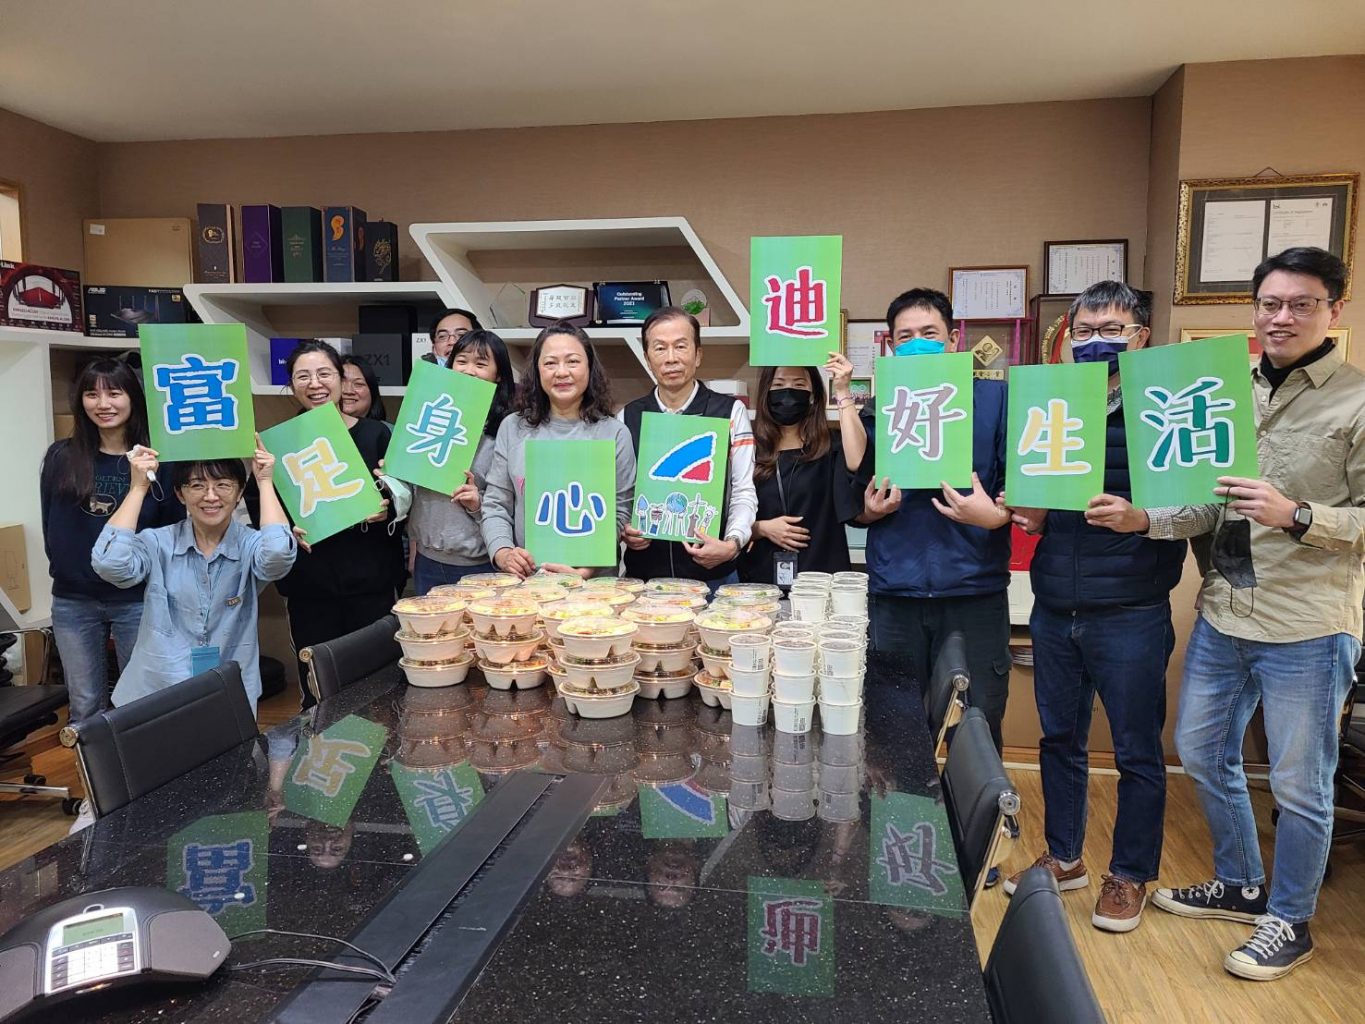 Fudy employees sharing a vegetarian healthy meal in support of the company's 2023 ESG Low Carbon Program.富迪員工共享蔬食健康餐，支持公司的2023 ESG新低碳計畫